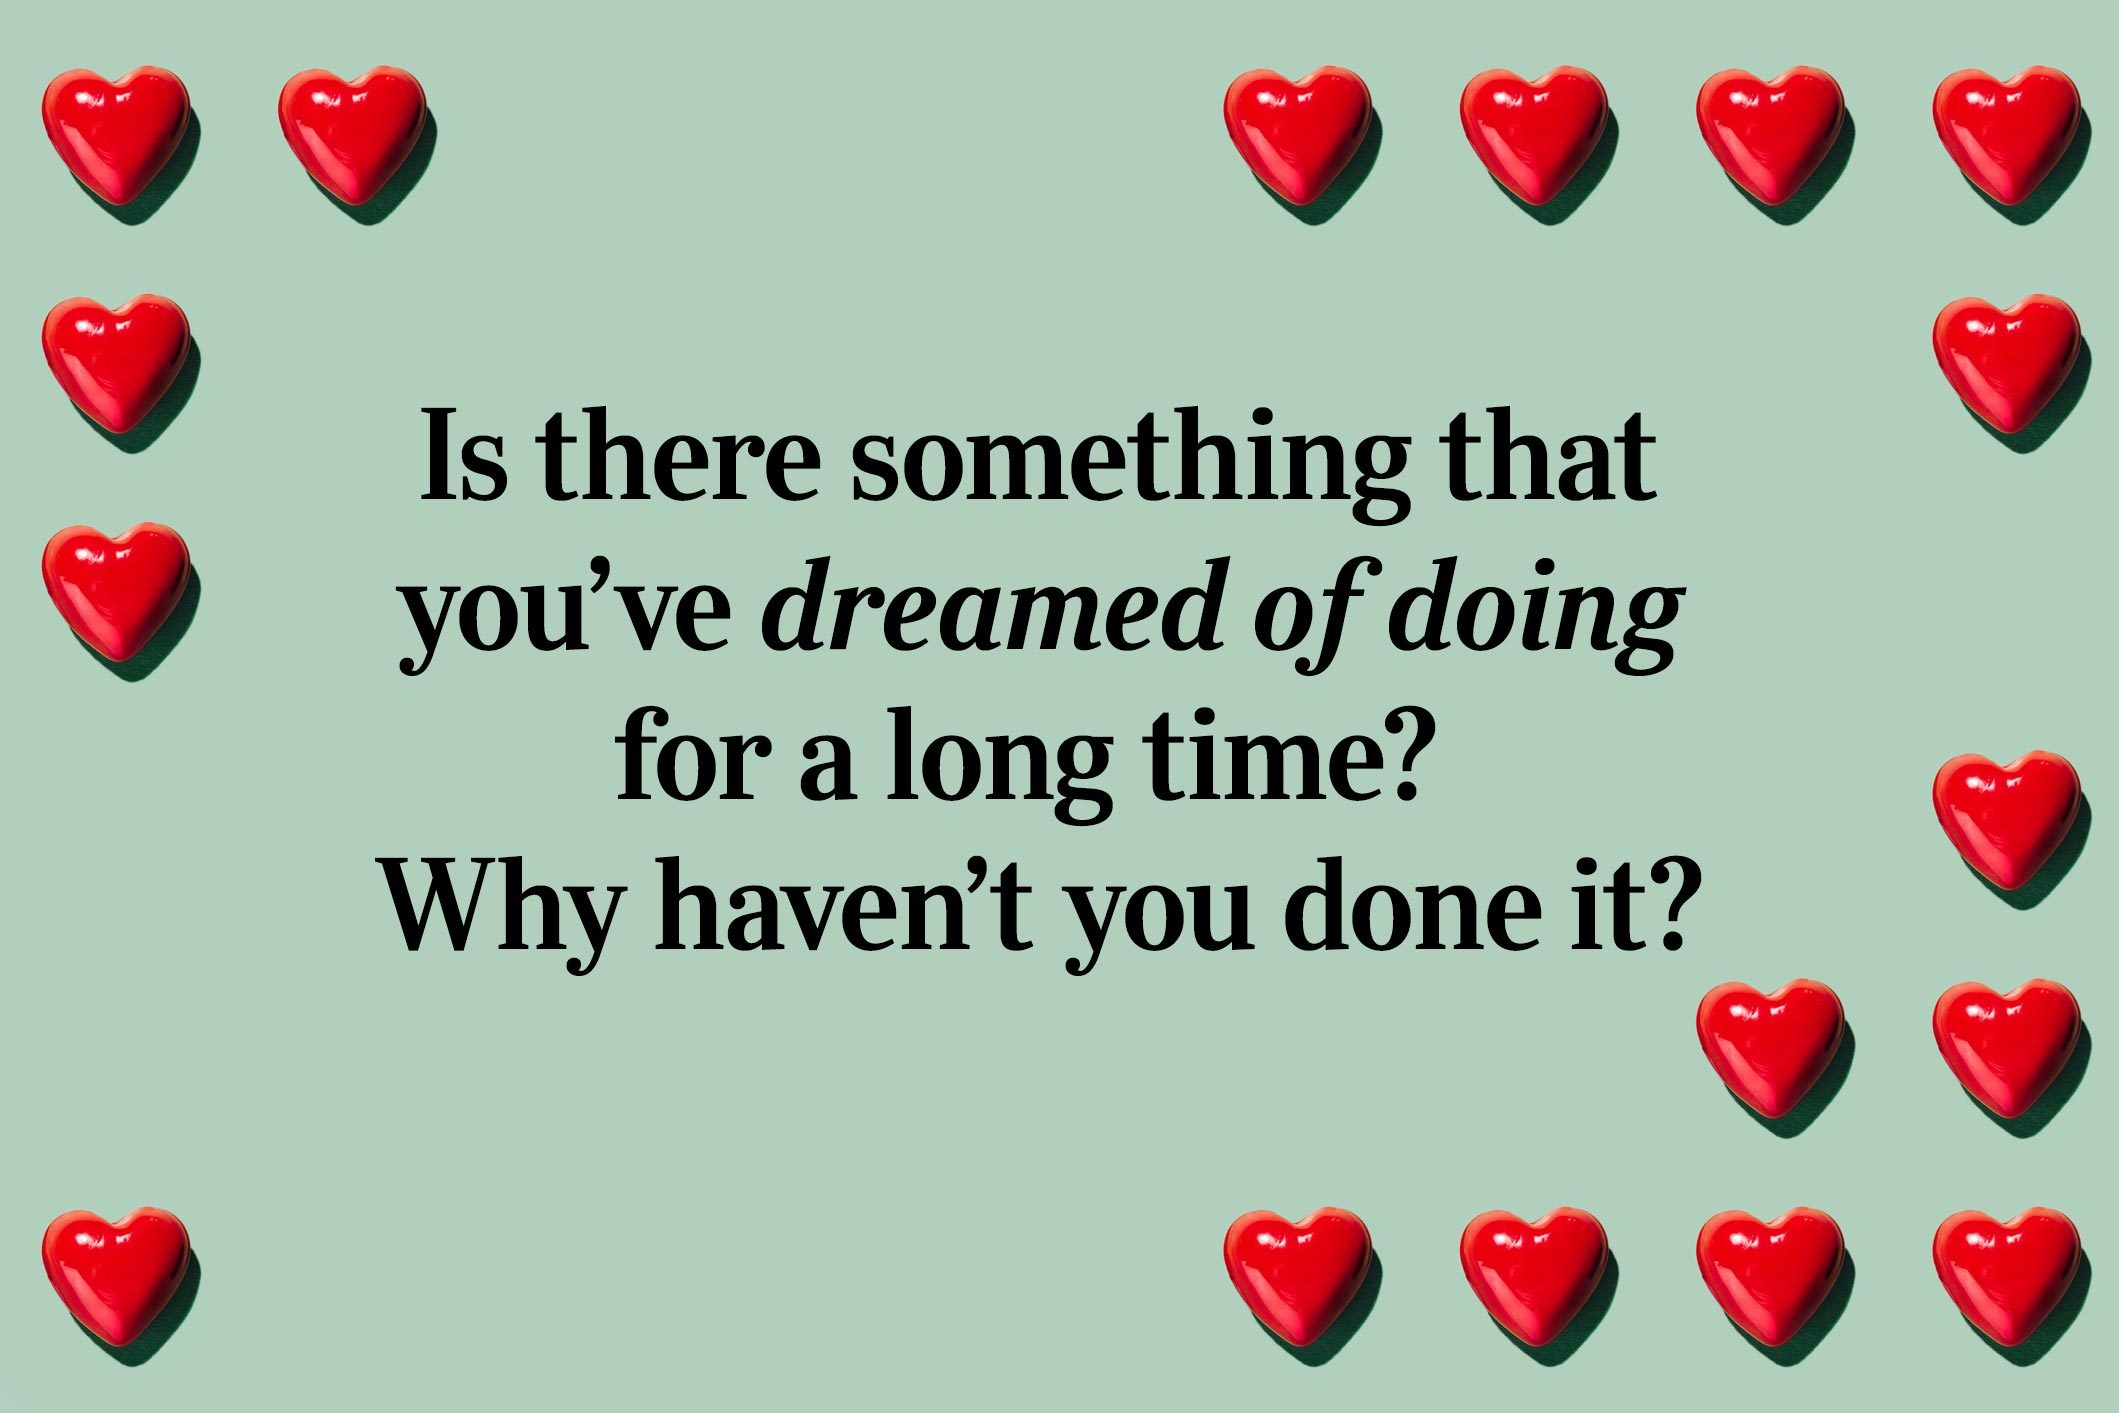 <p>Is there something that you’ve dreamed of doing for a long time? Why haven’t you done it?</p>